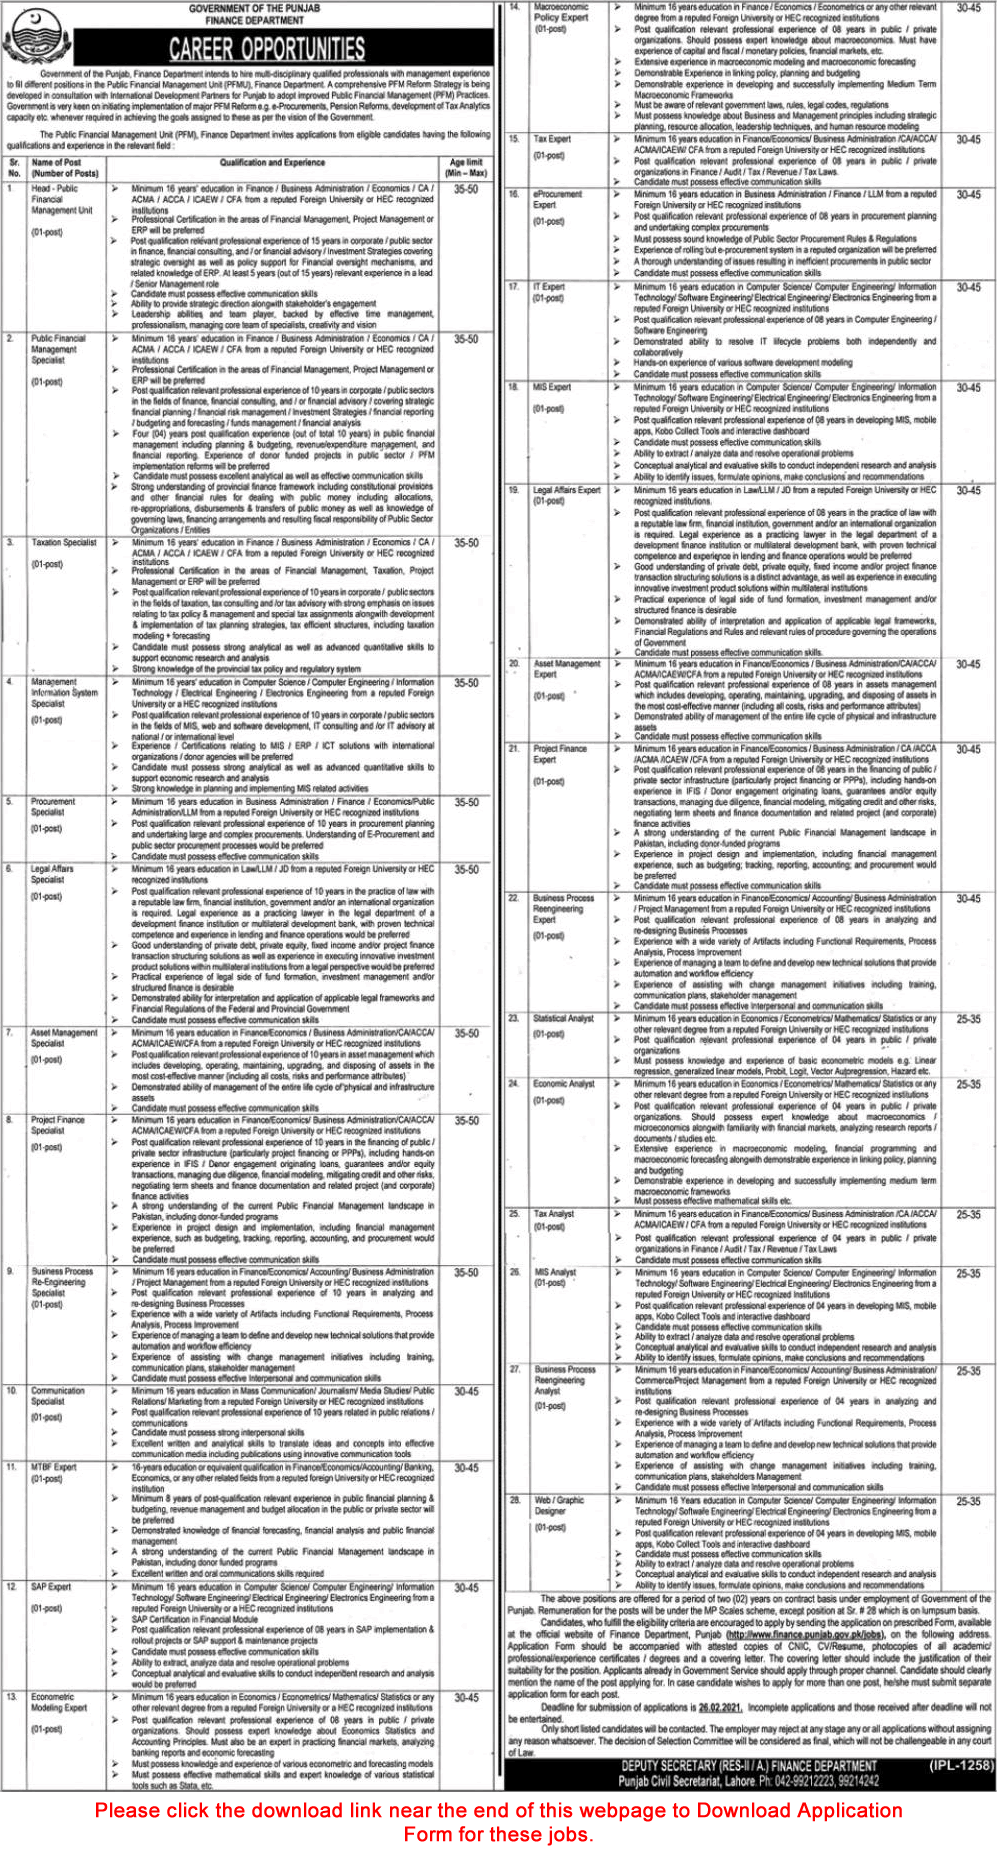 Finance Department Punjab Jobs 2021 February Application Form Specialists, Experts, Analysts & Others Latest